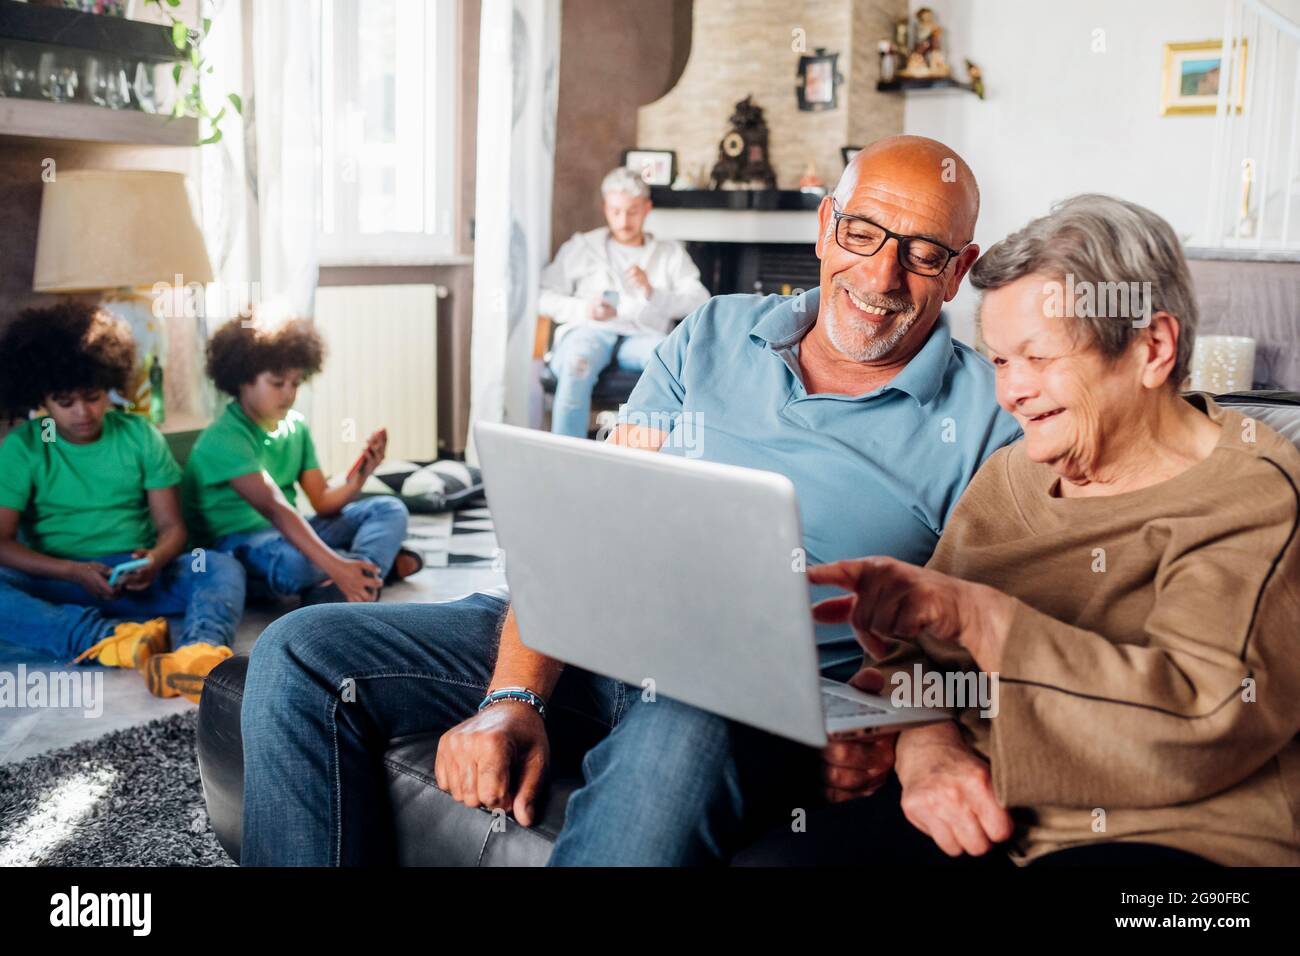 Multi-ethnic family spending leisure time at home Stock Photo